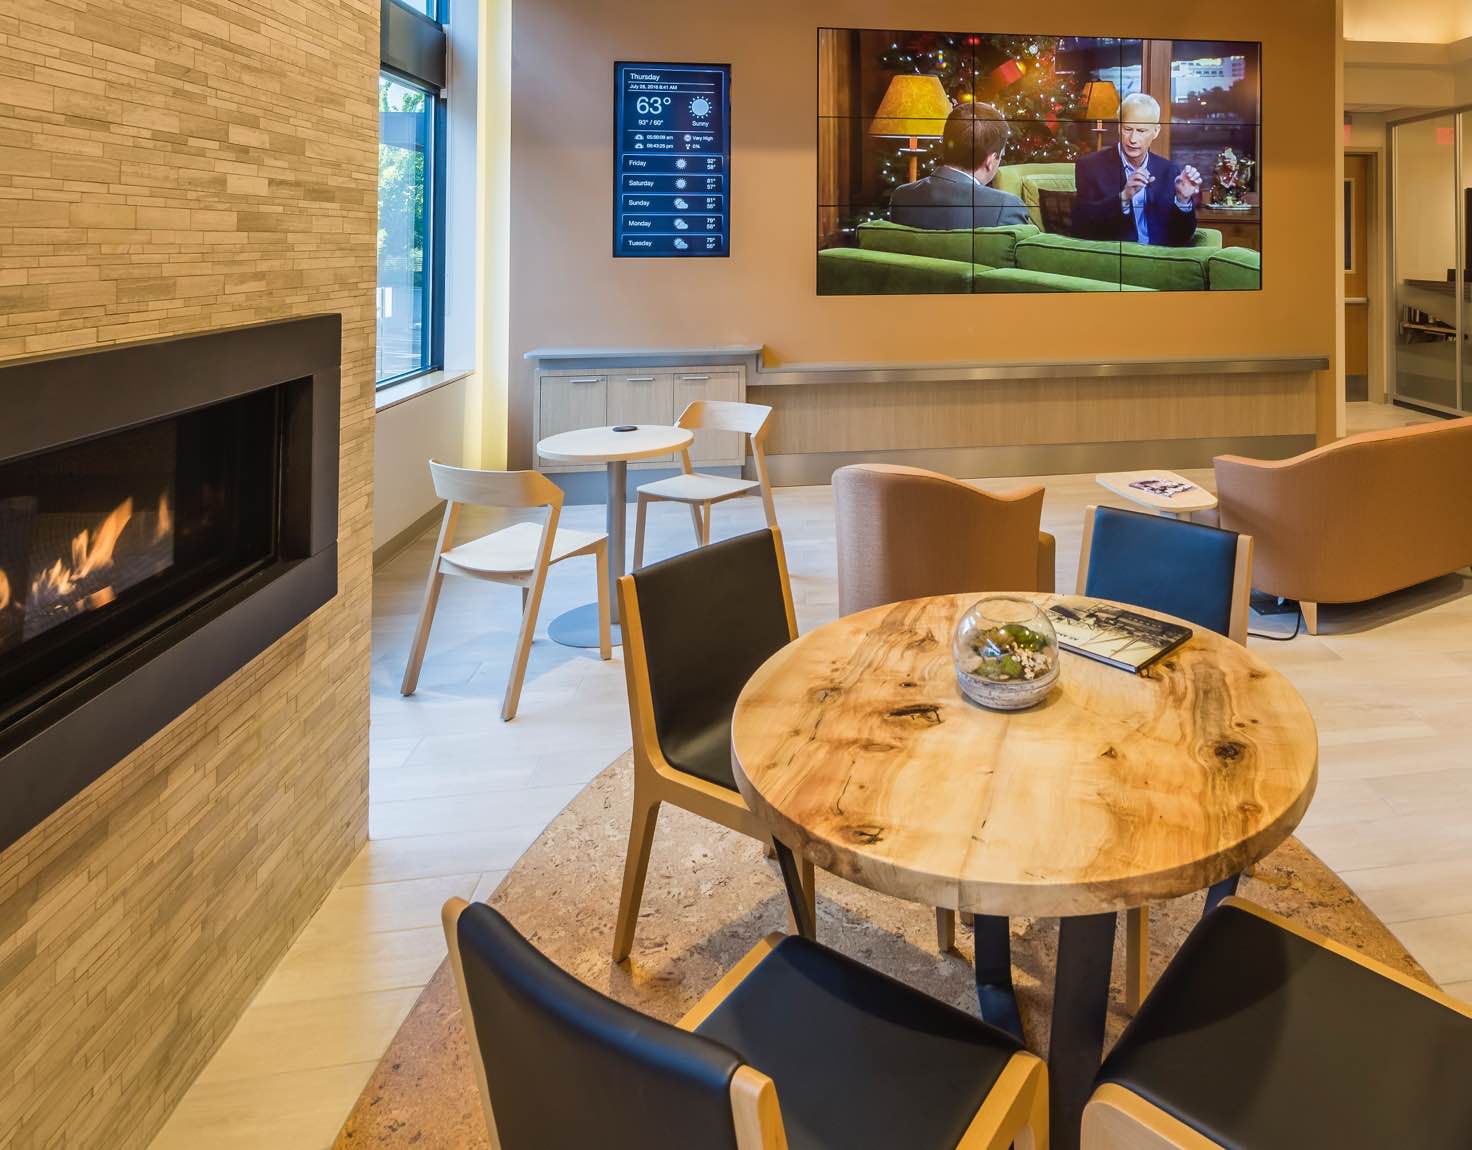 A waiting room with a wood table, black chairs, a wall of televisions and a fireplace.